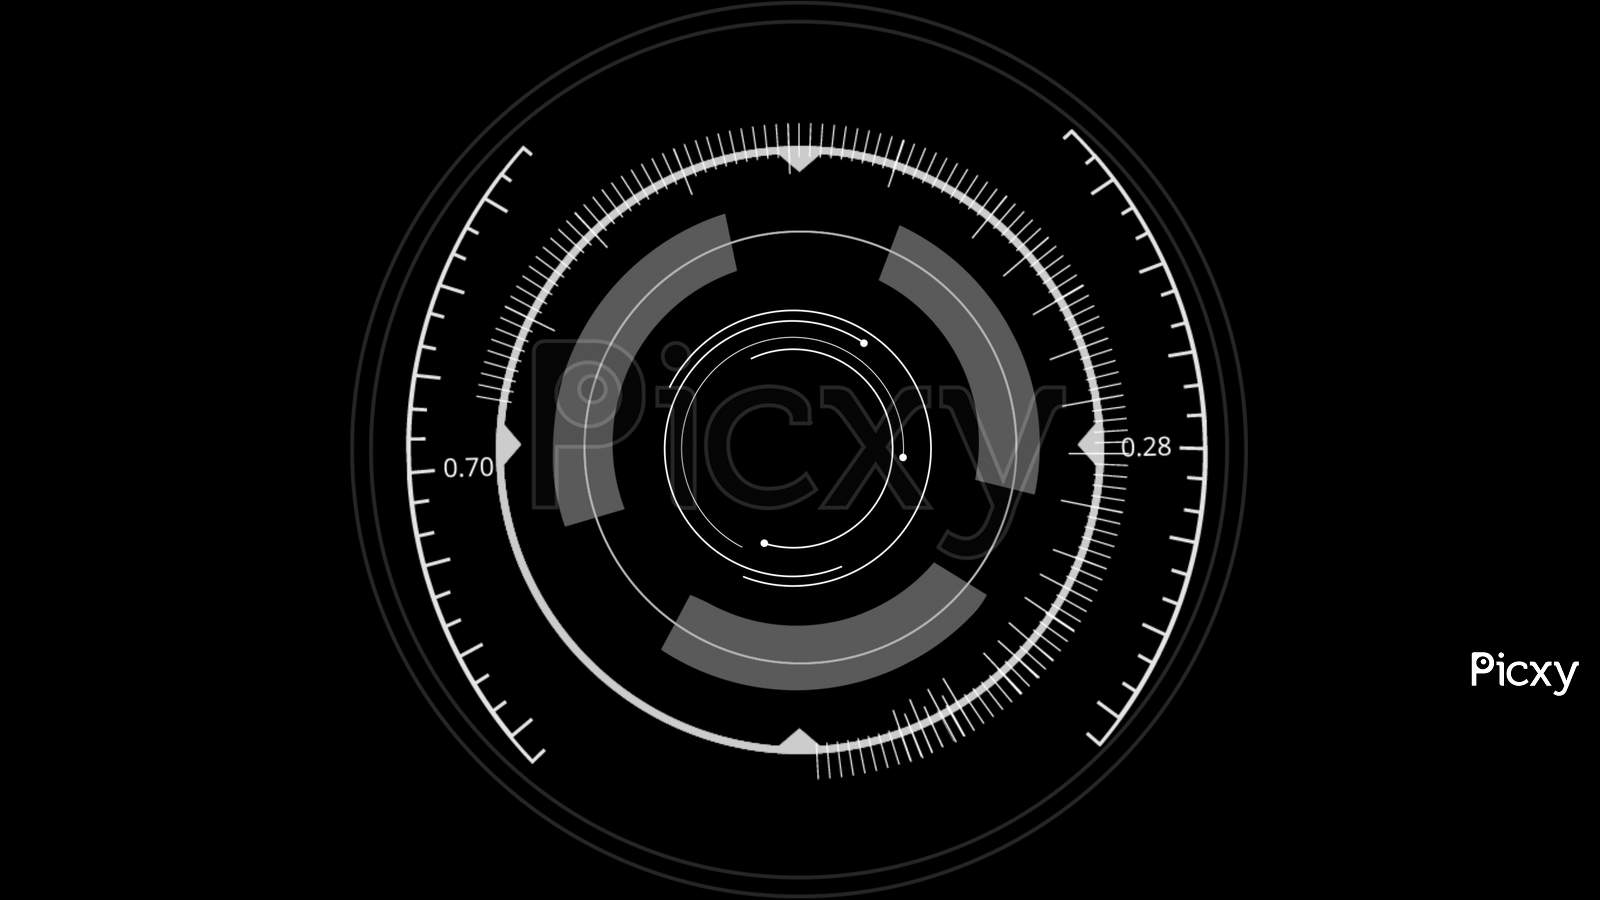 Hud Circle User Interface On Black Background. Target Searching And Scanning Holographic Element Theme. Digital Ui And Sci-Fi Circular Hologram Technology. 3D Illustration Rendering